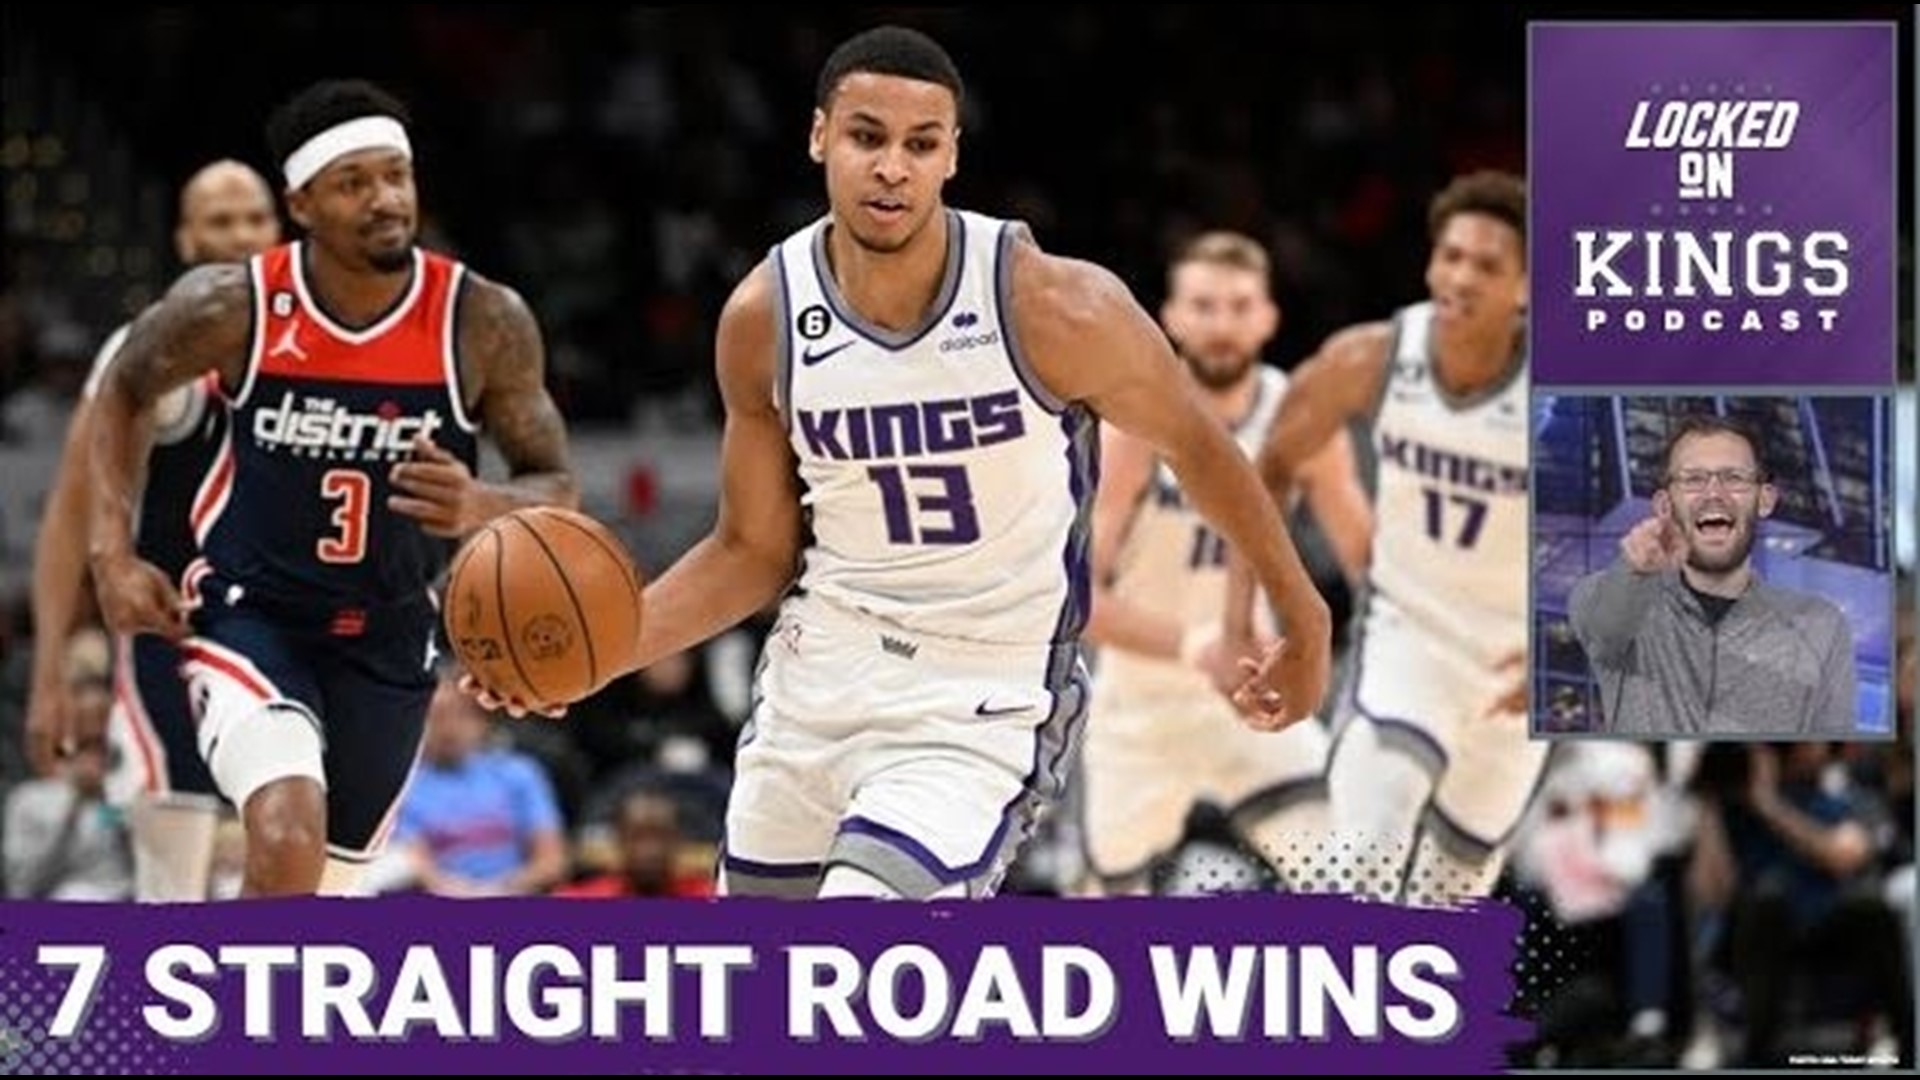 Matt George on the Sacramento Kings winning their 7th straight road game, the 2nd longest streak in franchise history, behind big nights from the stars.